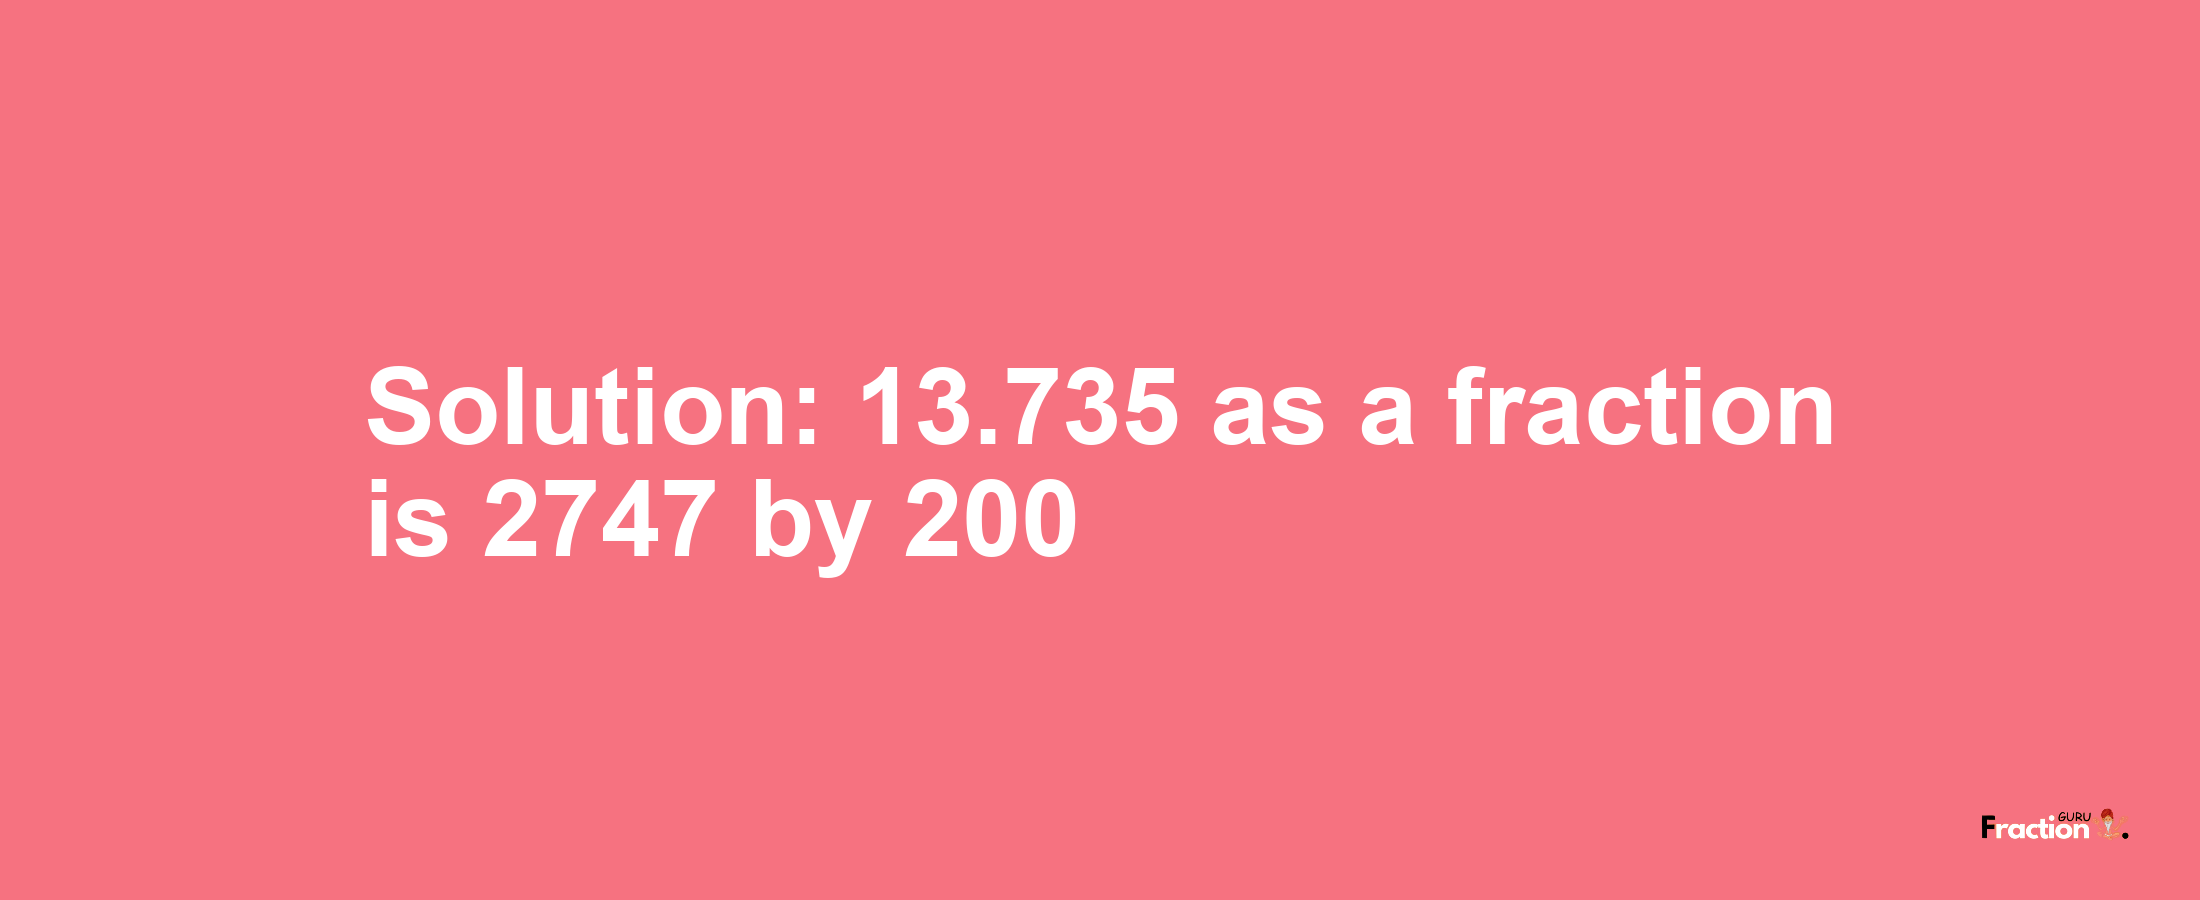 Solution:13.735 as a fraction is 2747/200